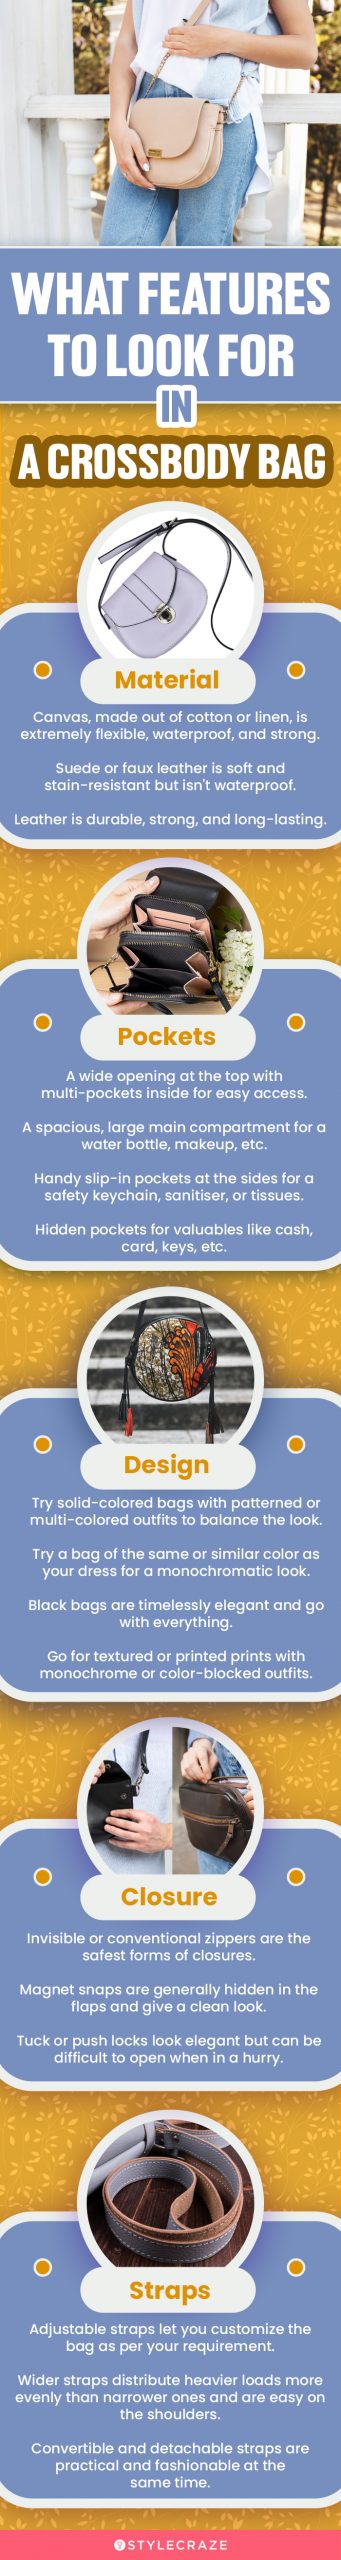 What Features To Look For In A Crossbody Bag (infographic)